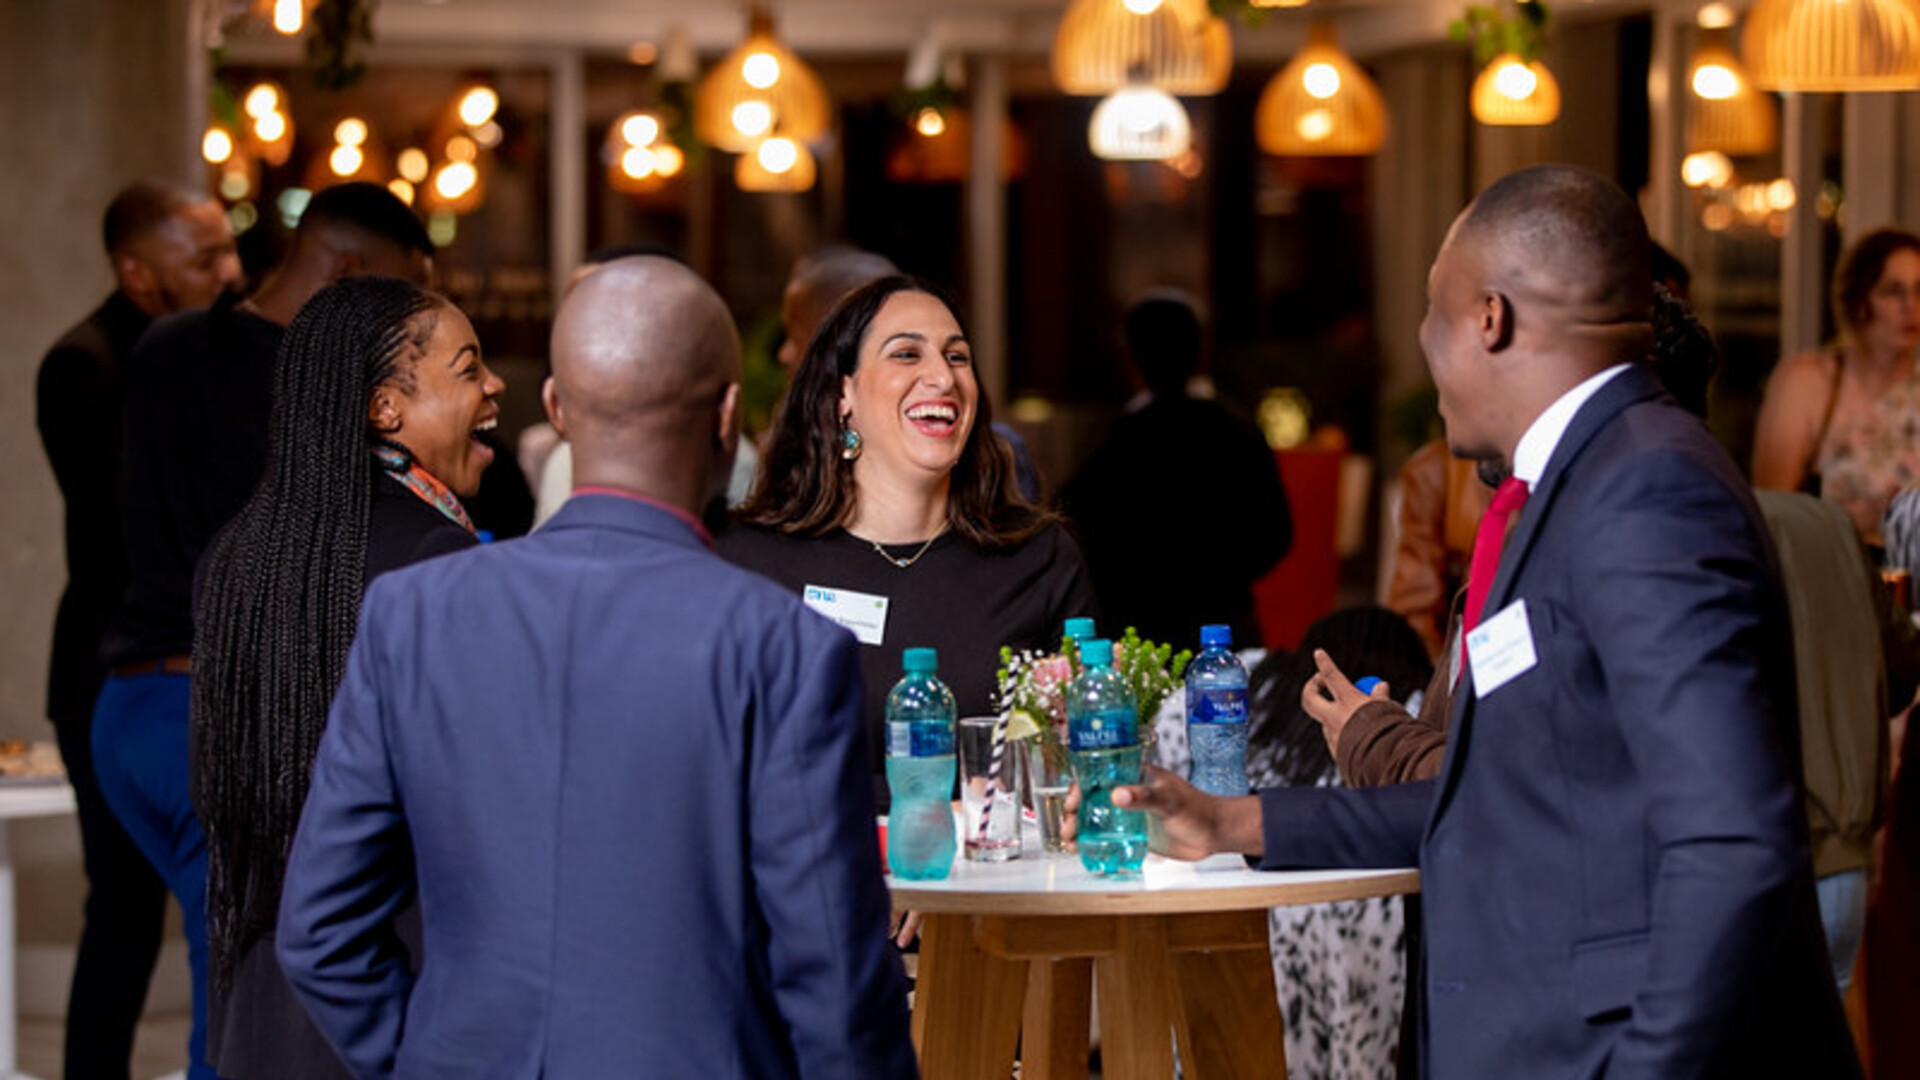 Two ladies and two gentlemen smartly dressed congregating around a standup table at the Reception at the South Africa Post-Summit